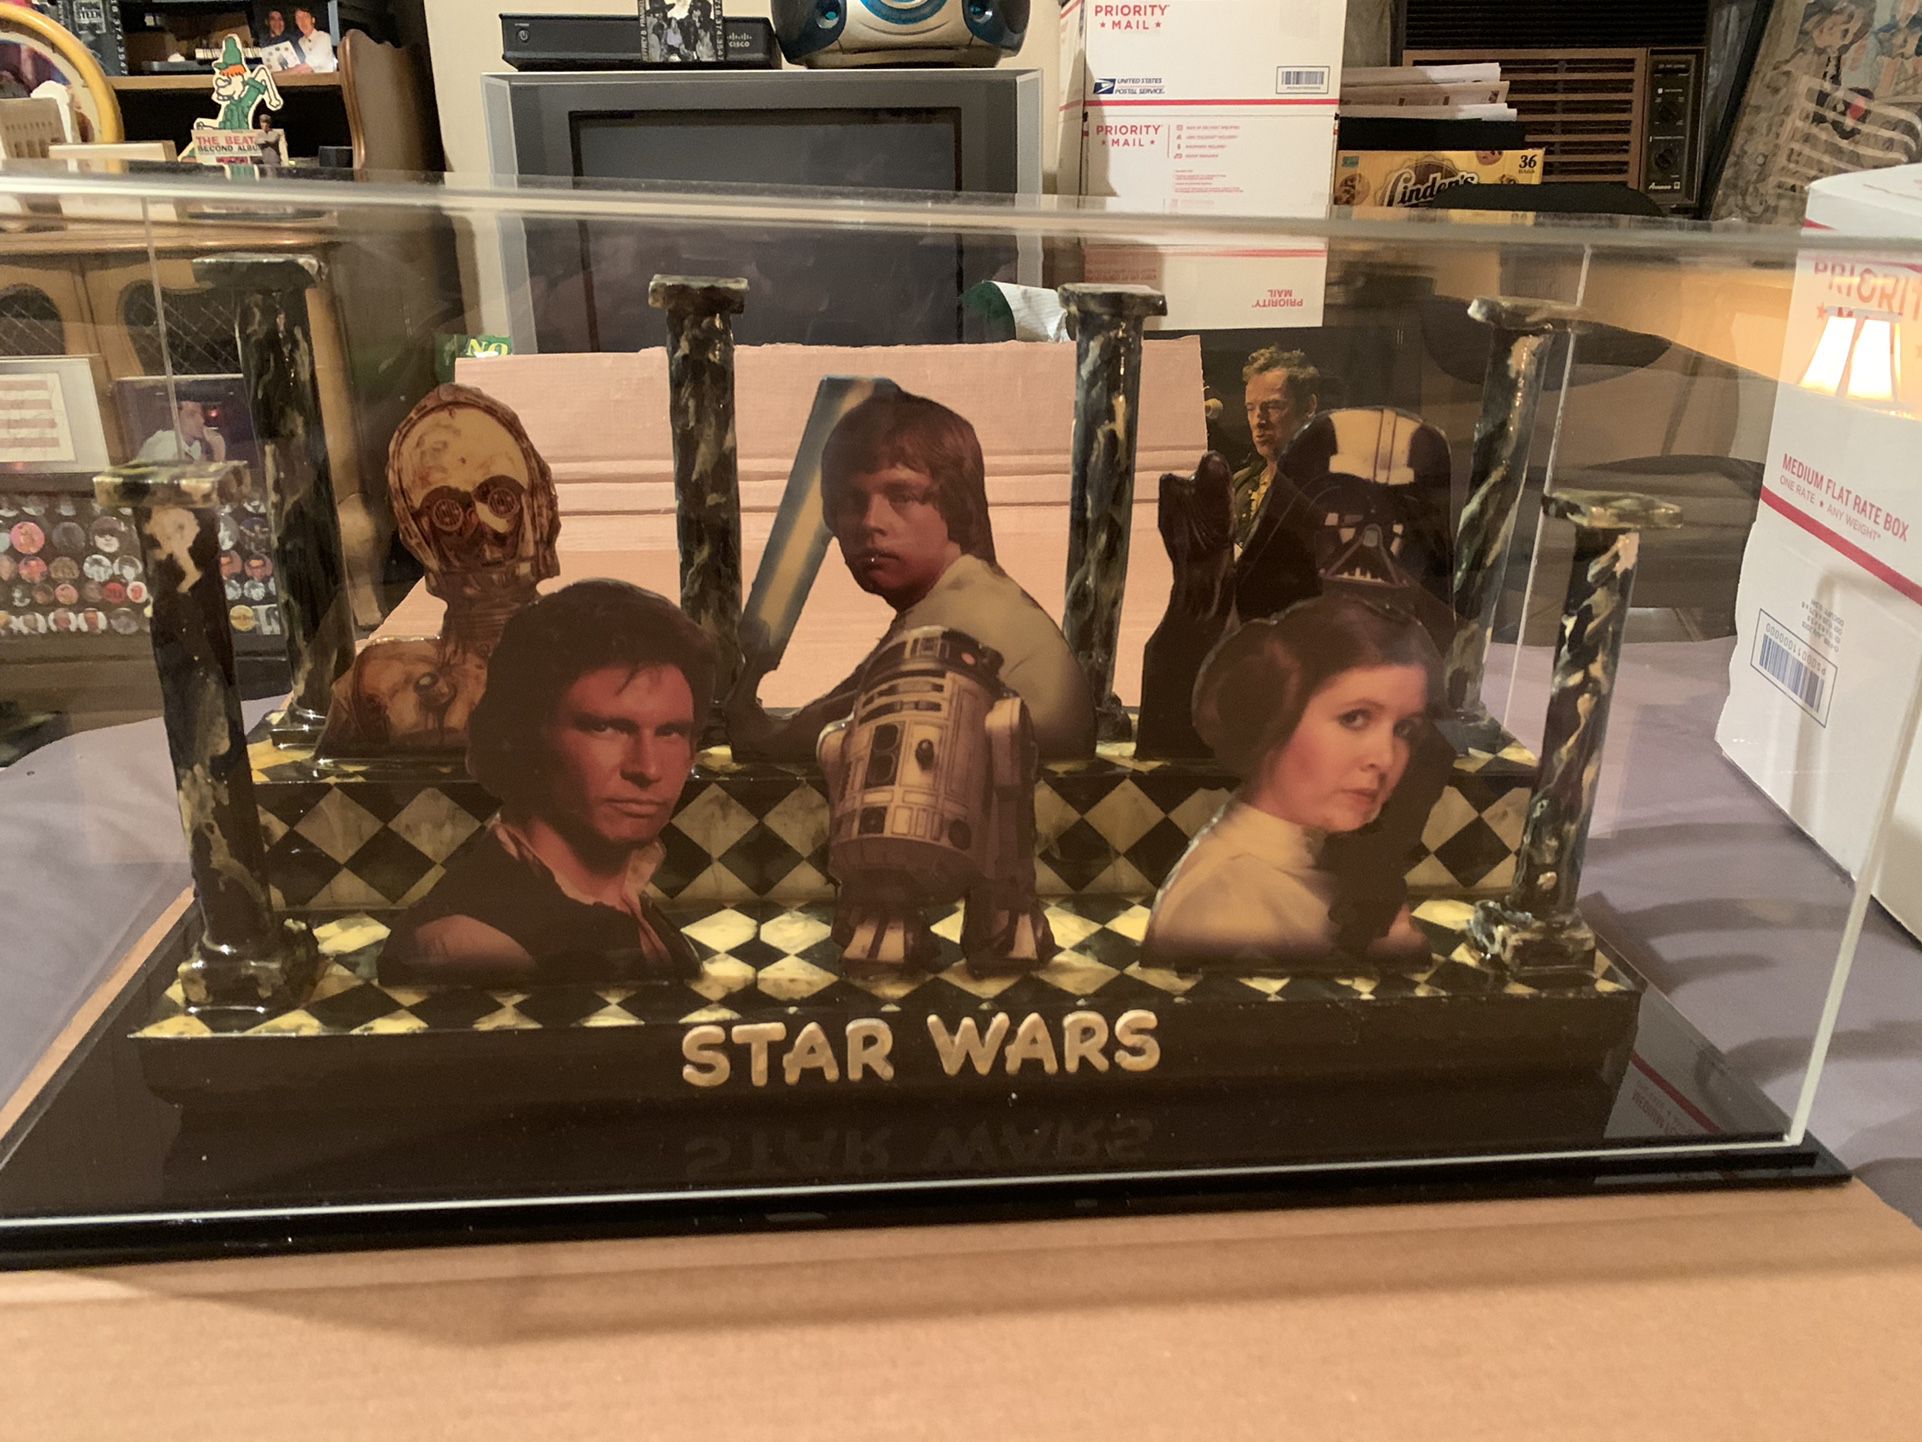 Star Wars mixed media sculpture one-of-a-kind large piece custom display case available upon 